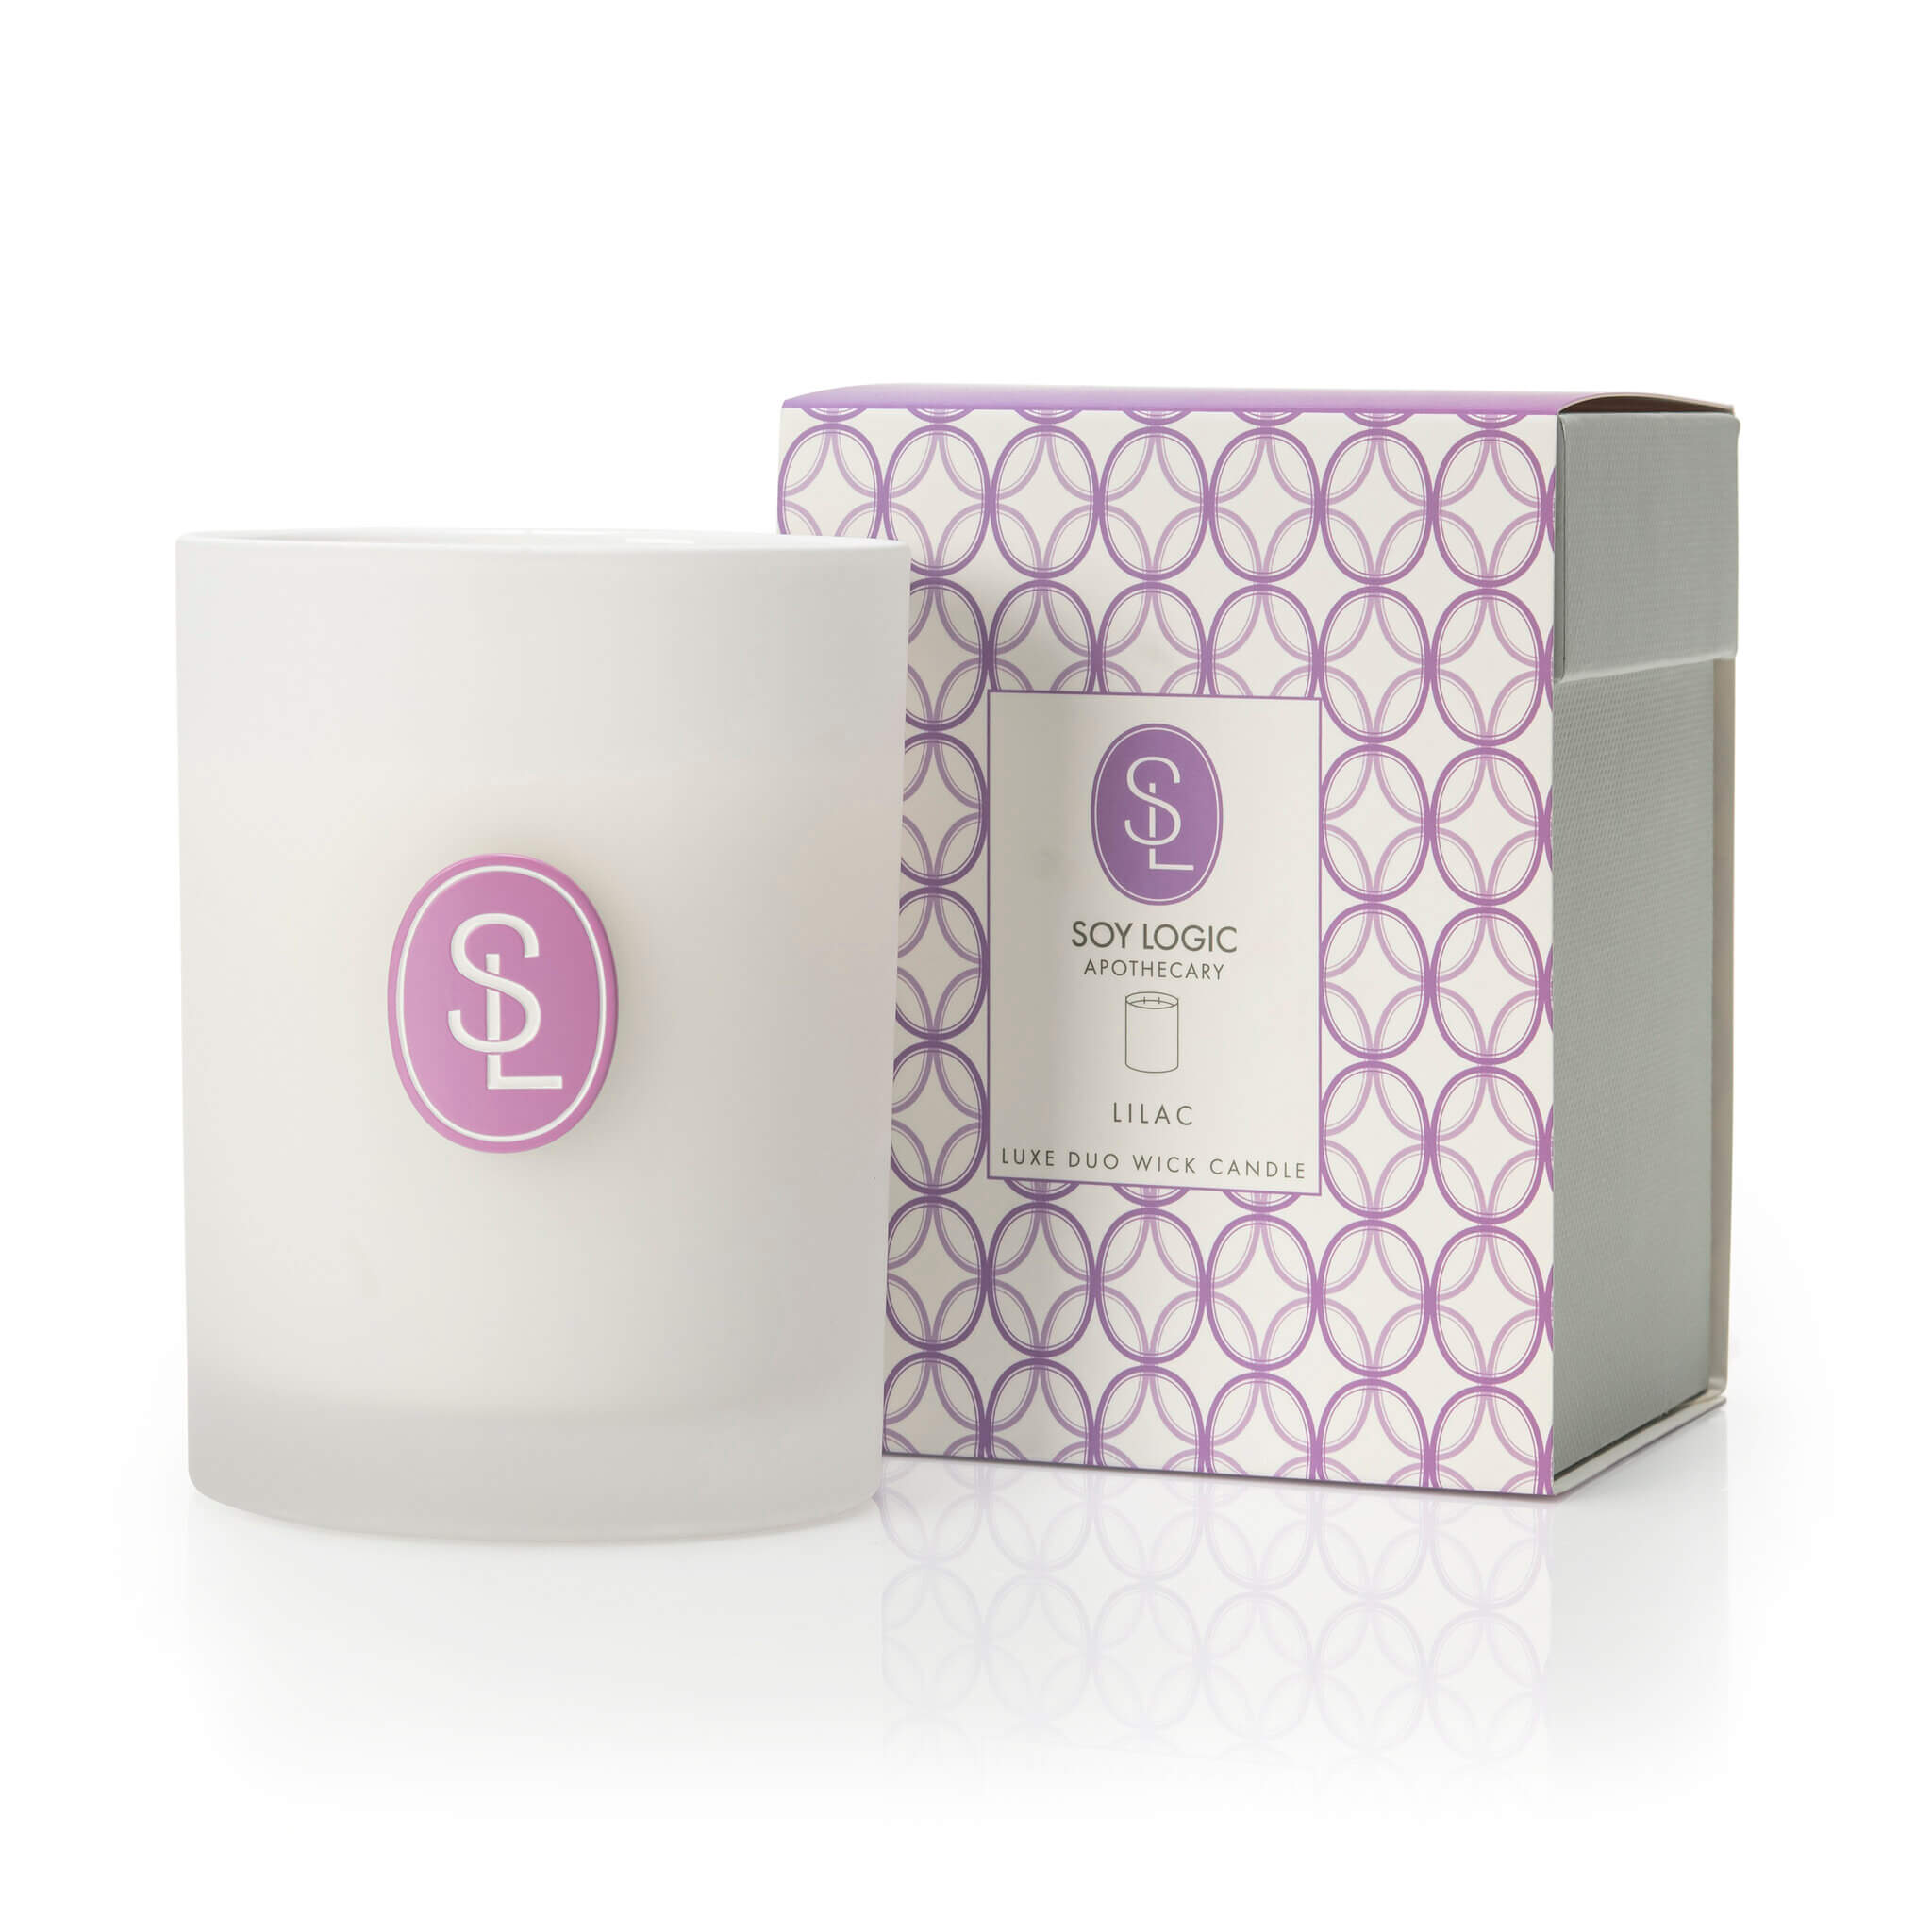 Lilac Classic Duo Wick Candle